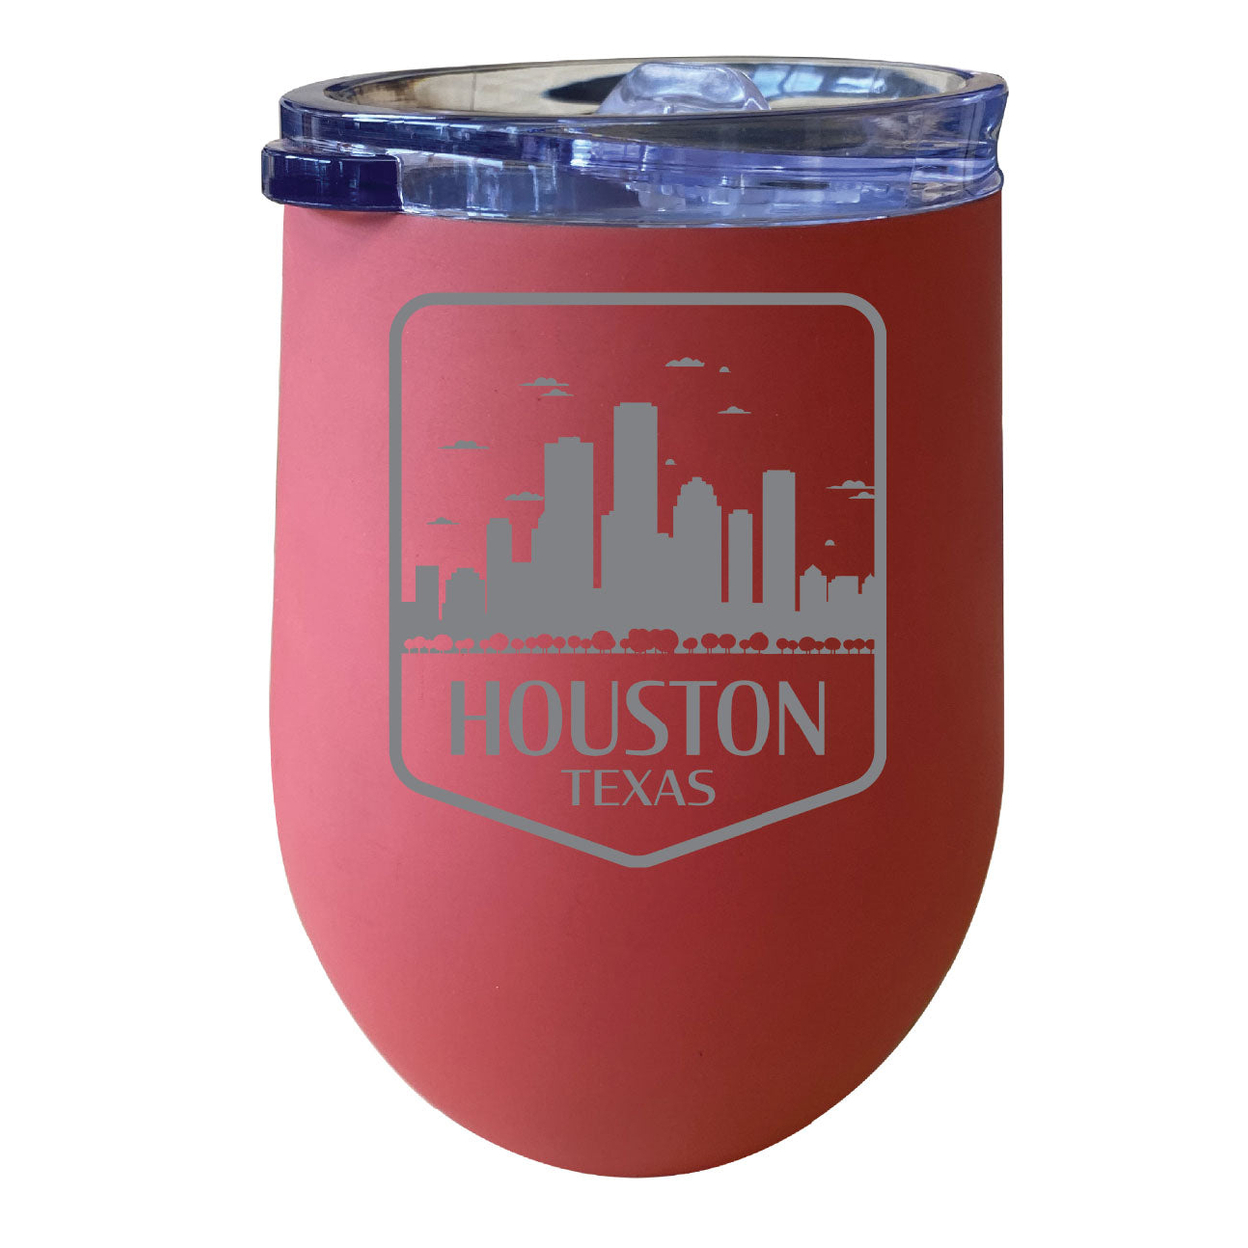 Houston Texas Souvenir 12 Oz Engraved Insulated Wine Stainless Steel Tumbler - Coral,,2-Pack